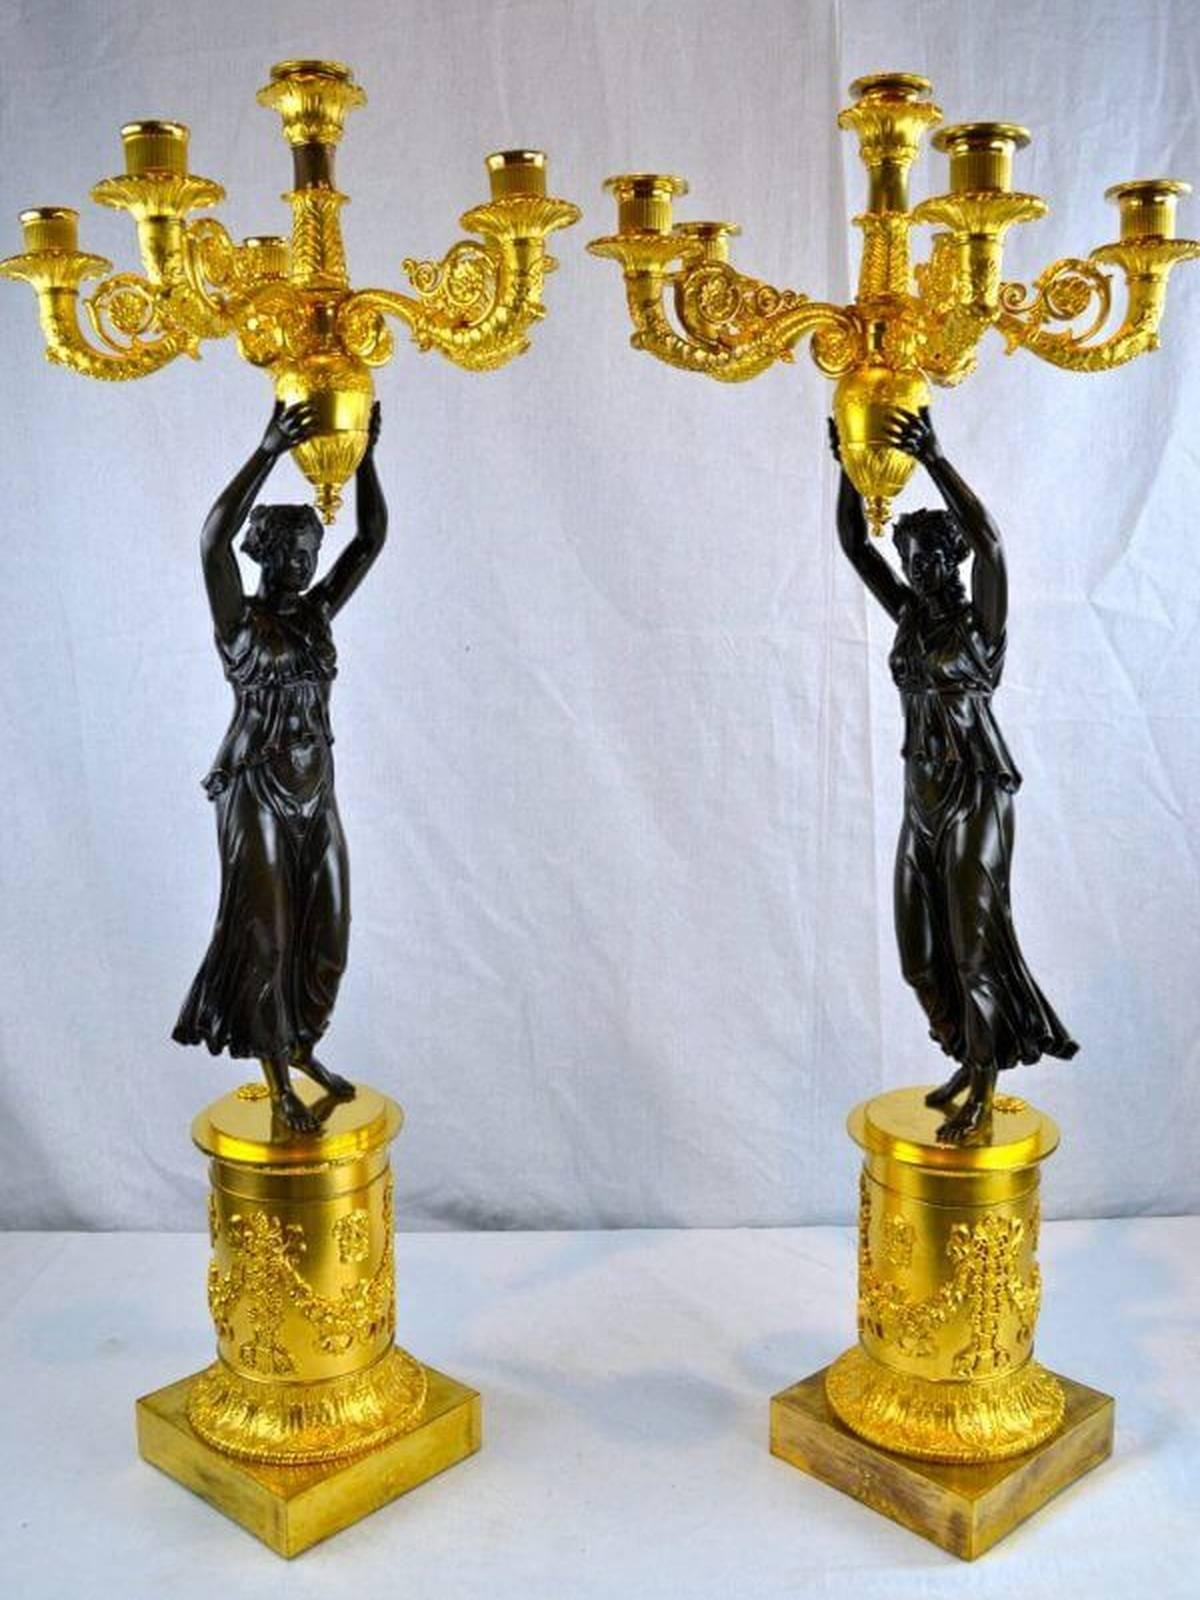 An important pair of period French Empire candelabra, the bases stamped with inventory marks from the Garde Meuble in Paris, (the repository of inventory from the French Royal collections as well as from major public institutions). A patinated